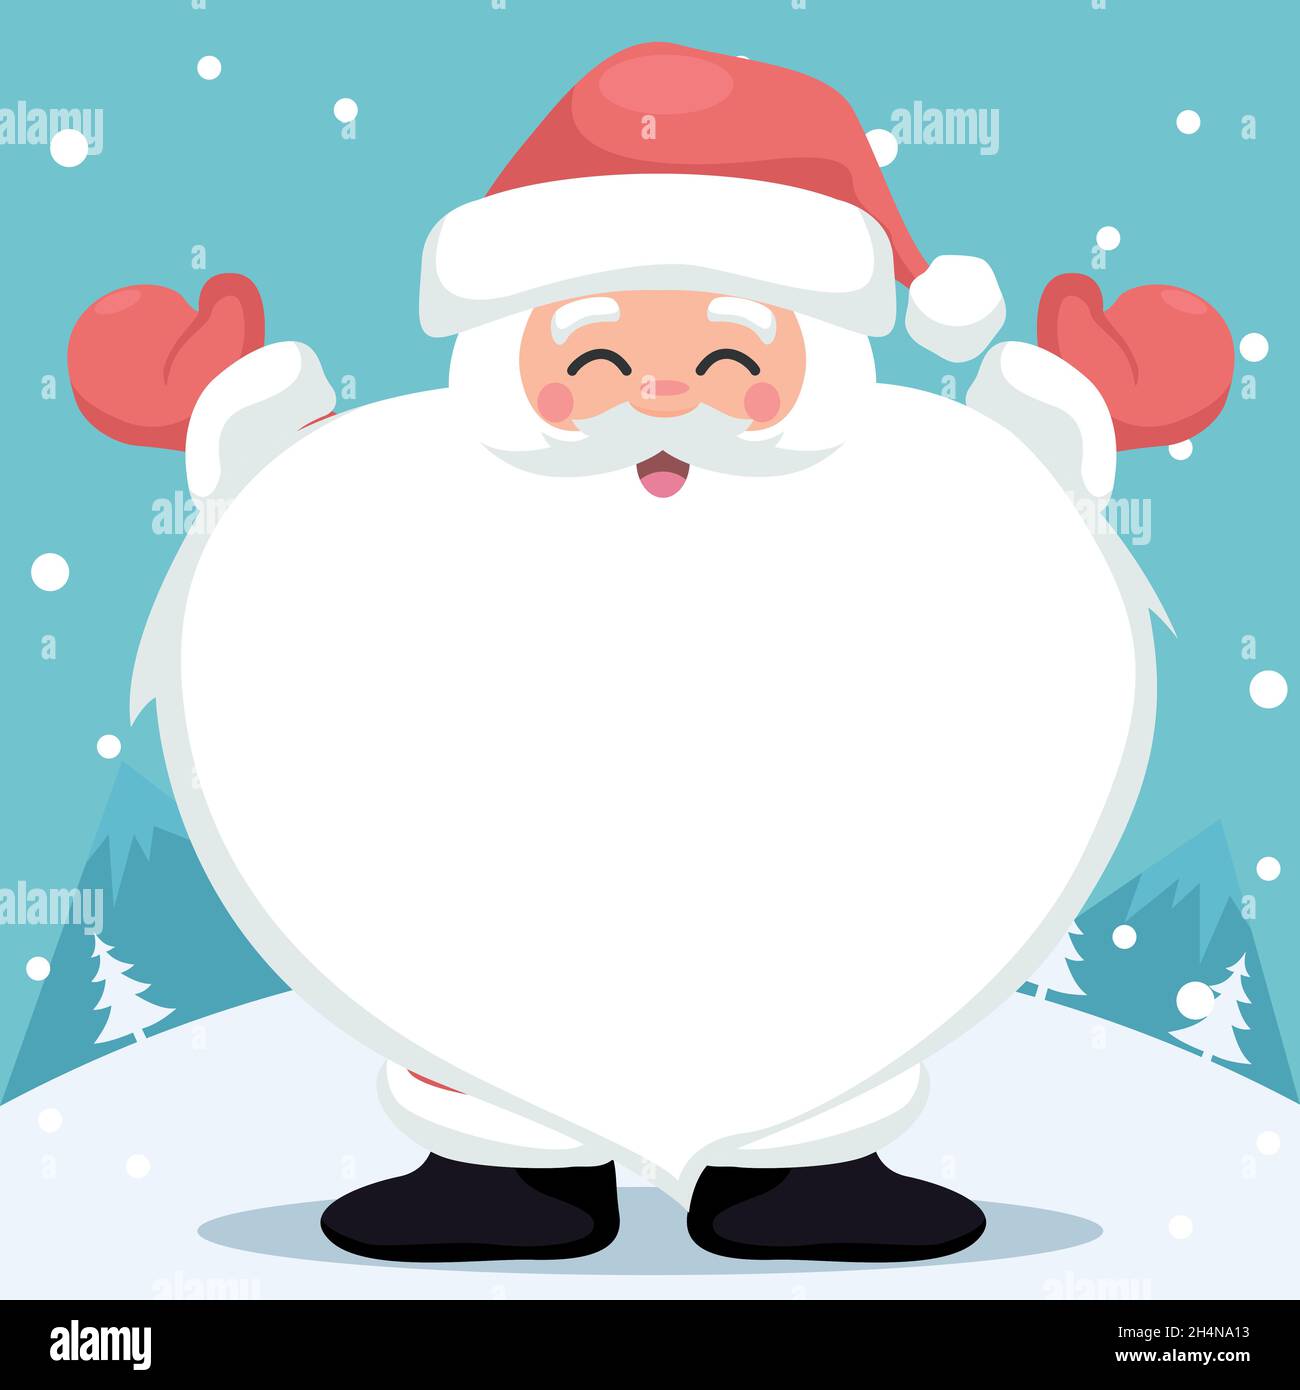 Merry Christmas card design of Santa Claus with heart shaped beards Stock Vector